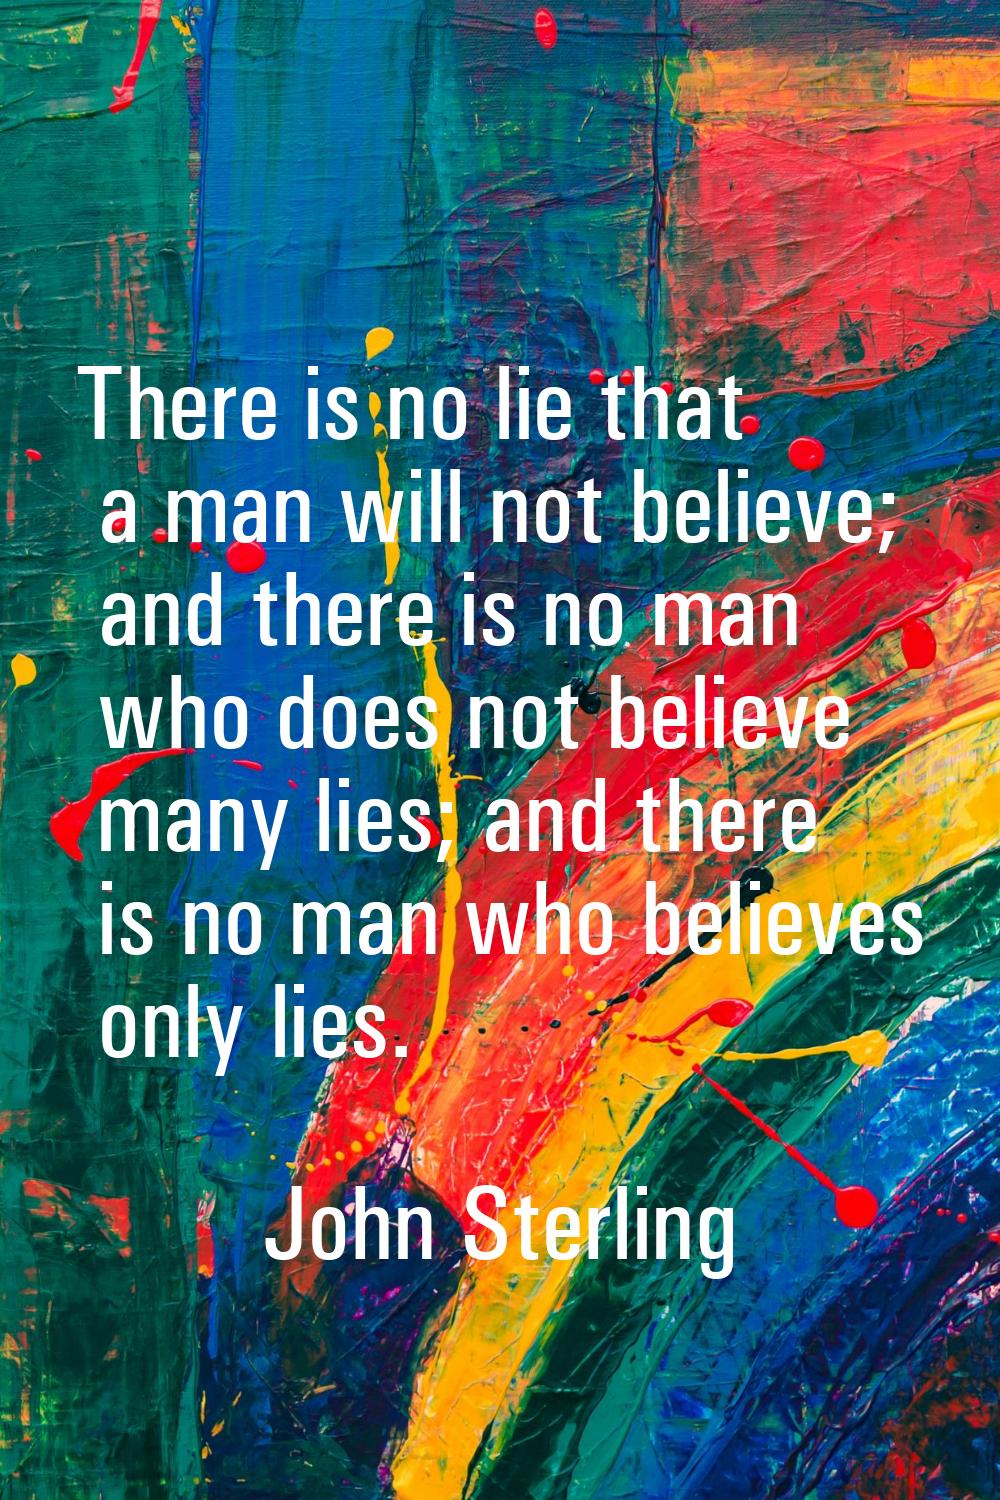 There is no lie that a man will not believe; and there is no man who does not believe many lies; an